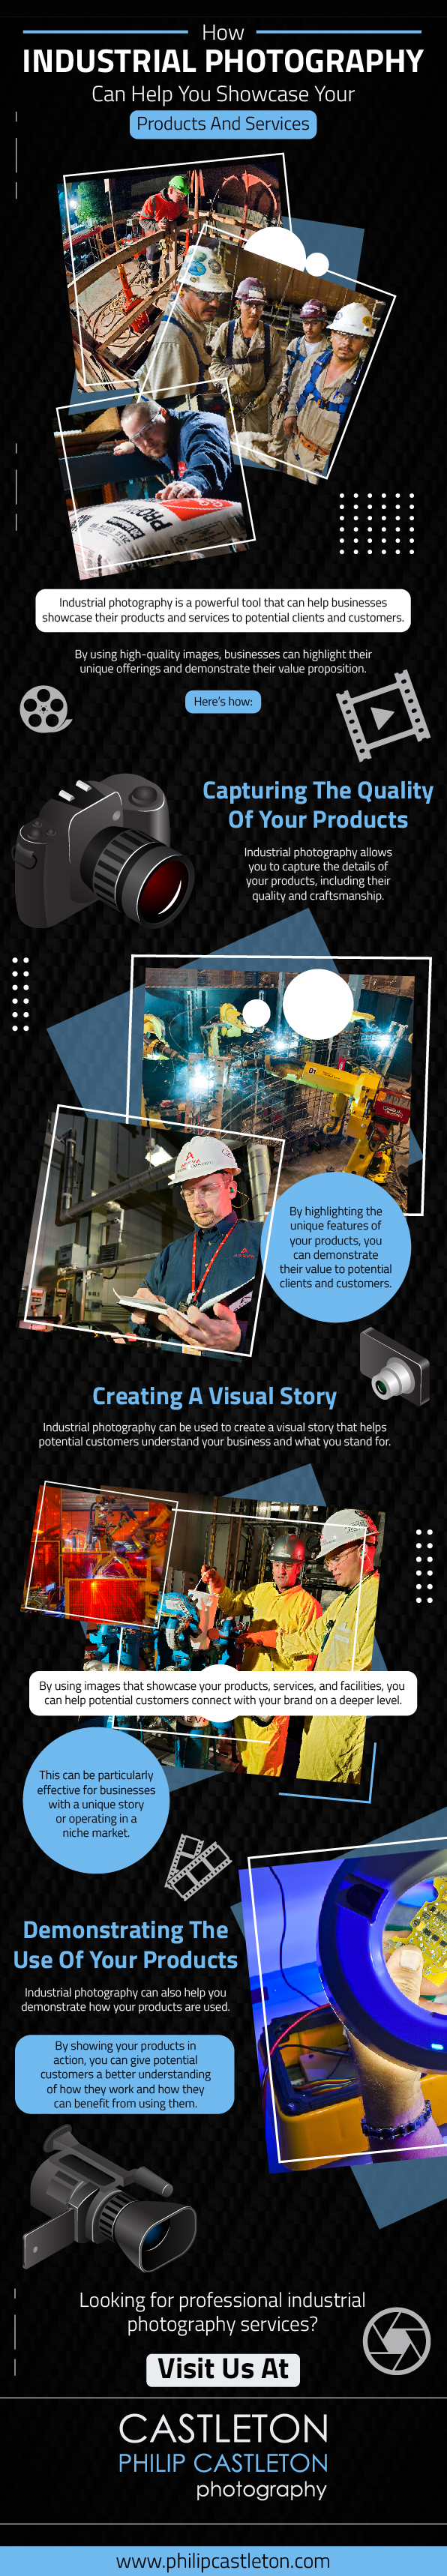 How Industrial Photography Can Help You Showcase Your Products And Service